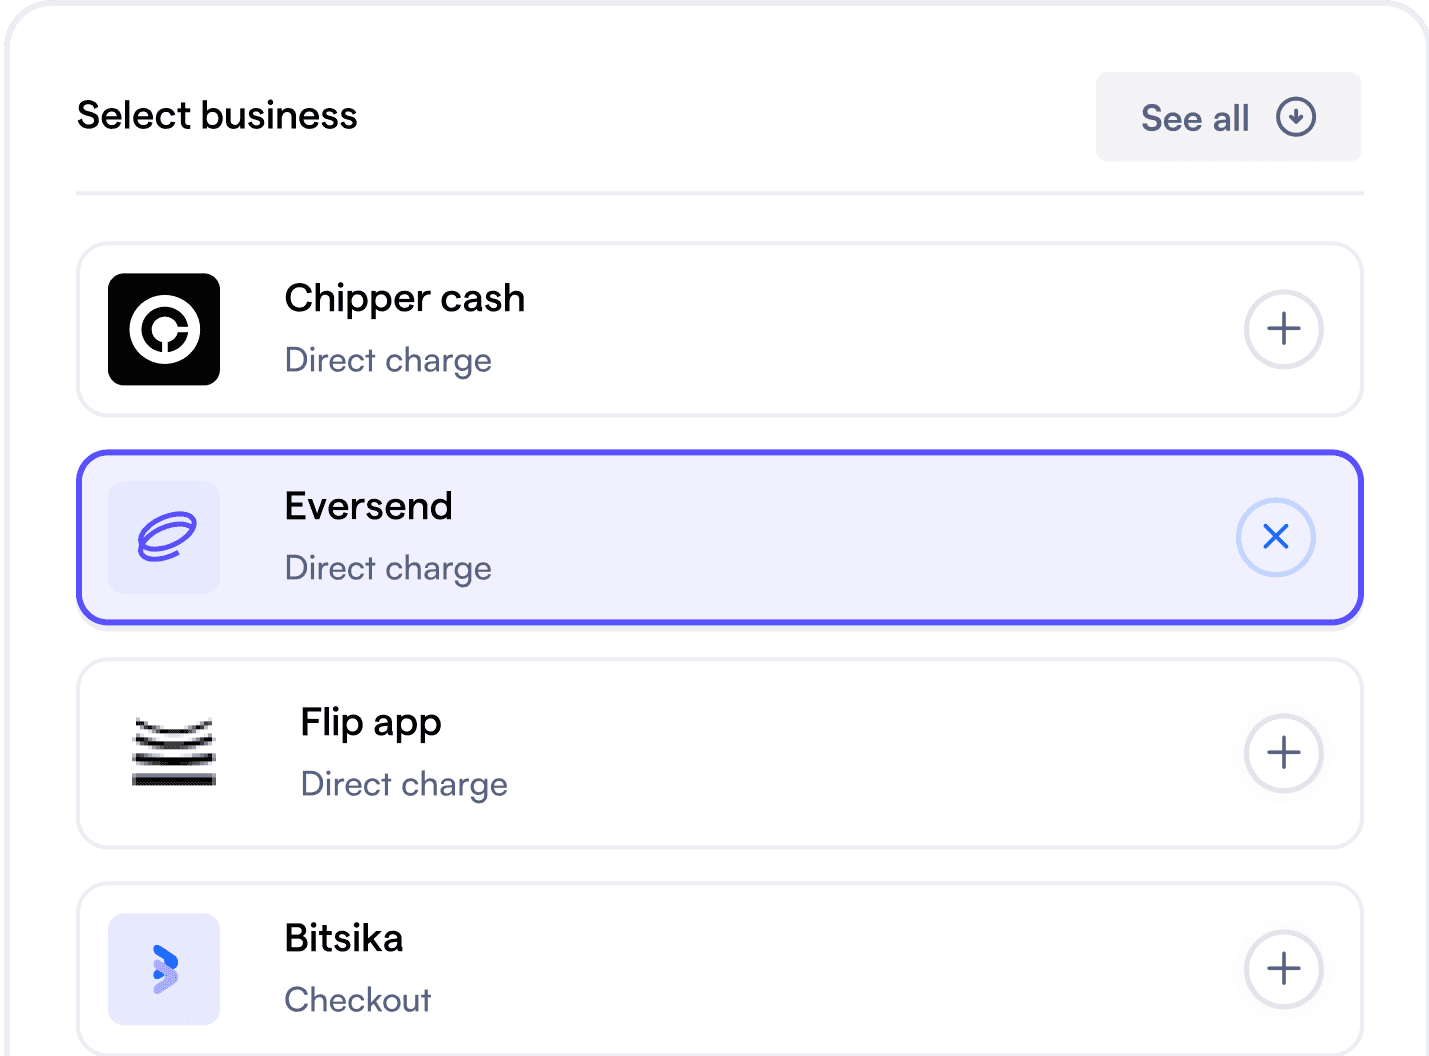 An image listing a few businesses to connect your wallet with namely Chipper cash, Eversend, Flip app, and Bitsika